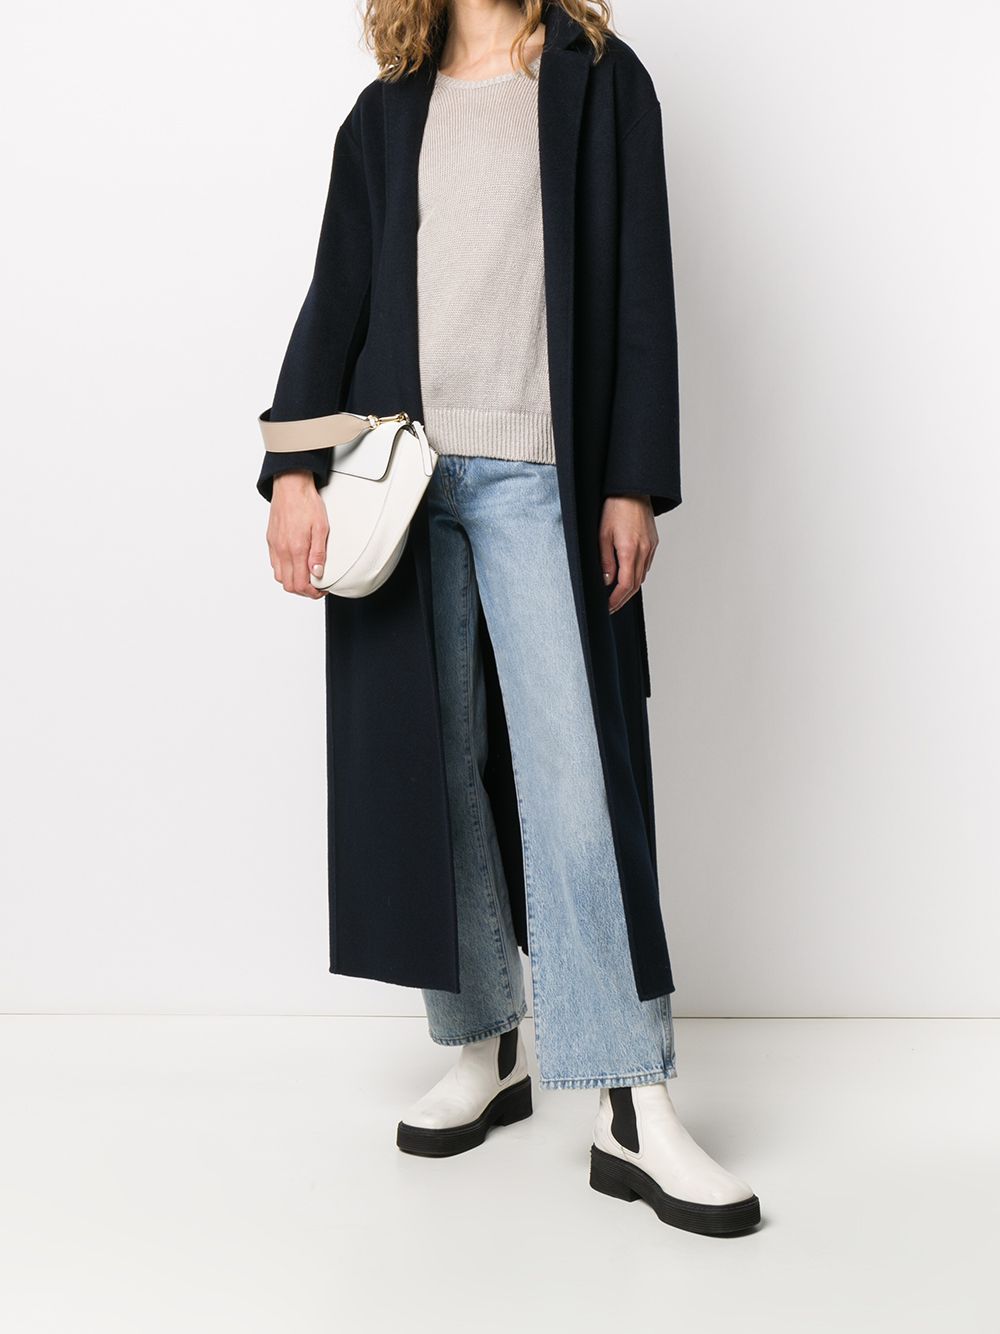 Shop Filippa K Alexa double-face belted coat with Express Delivery ...